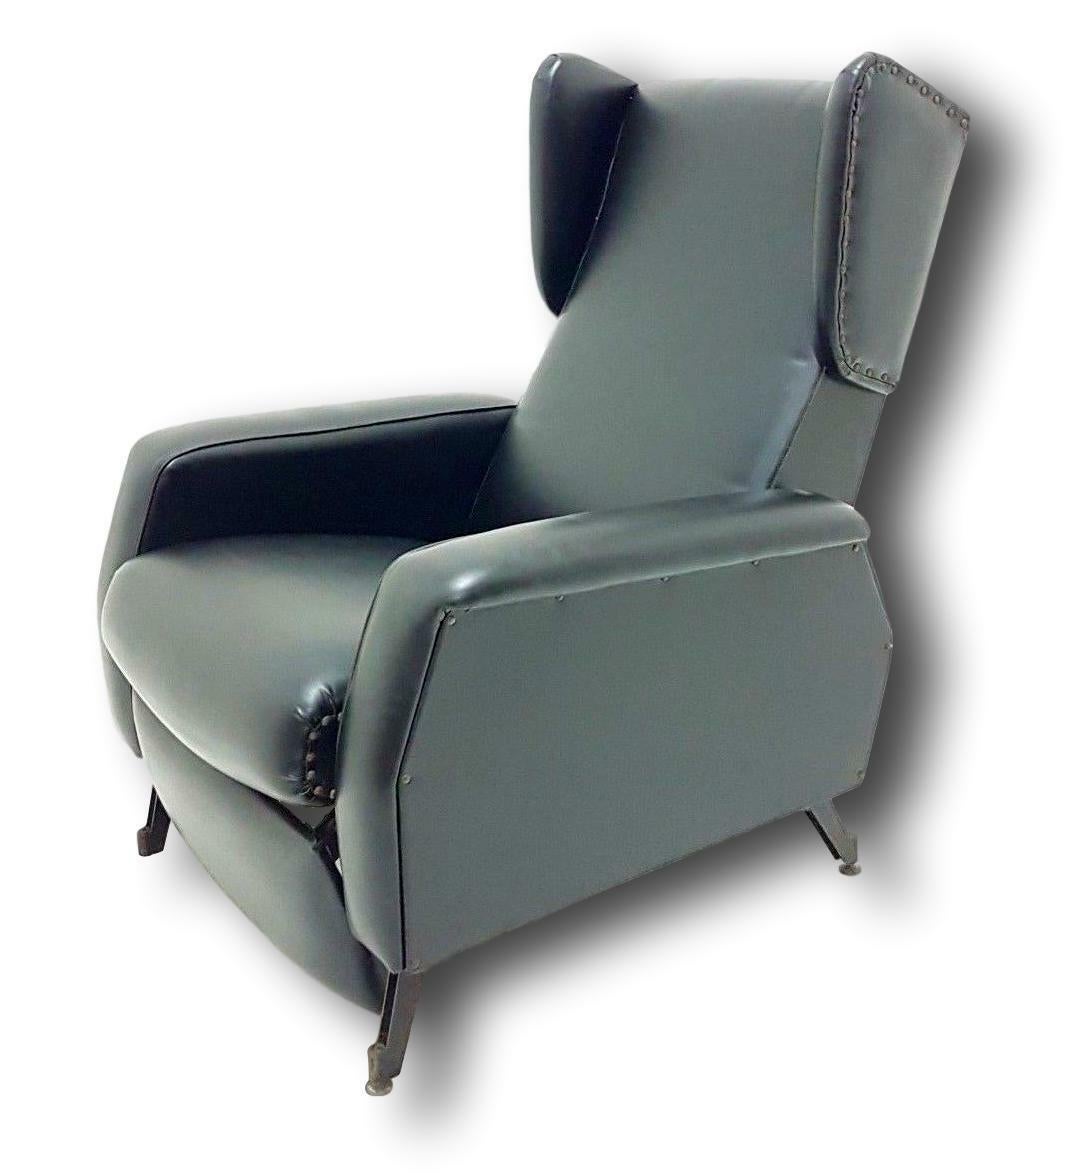 Recliner Armchair in Eco-Leather, 1970s For Sale 2